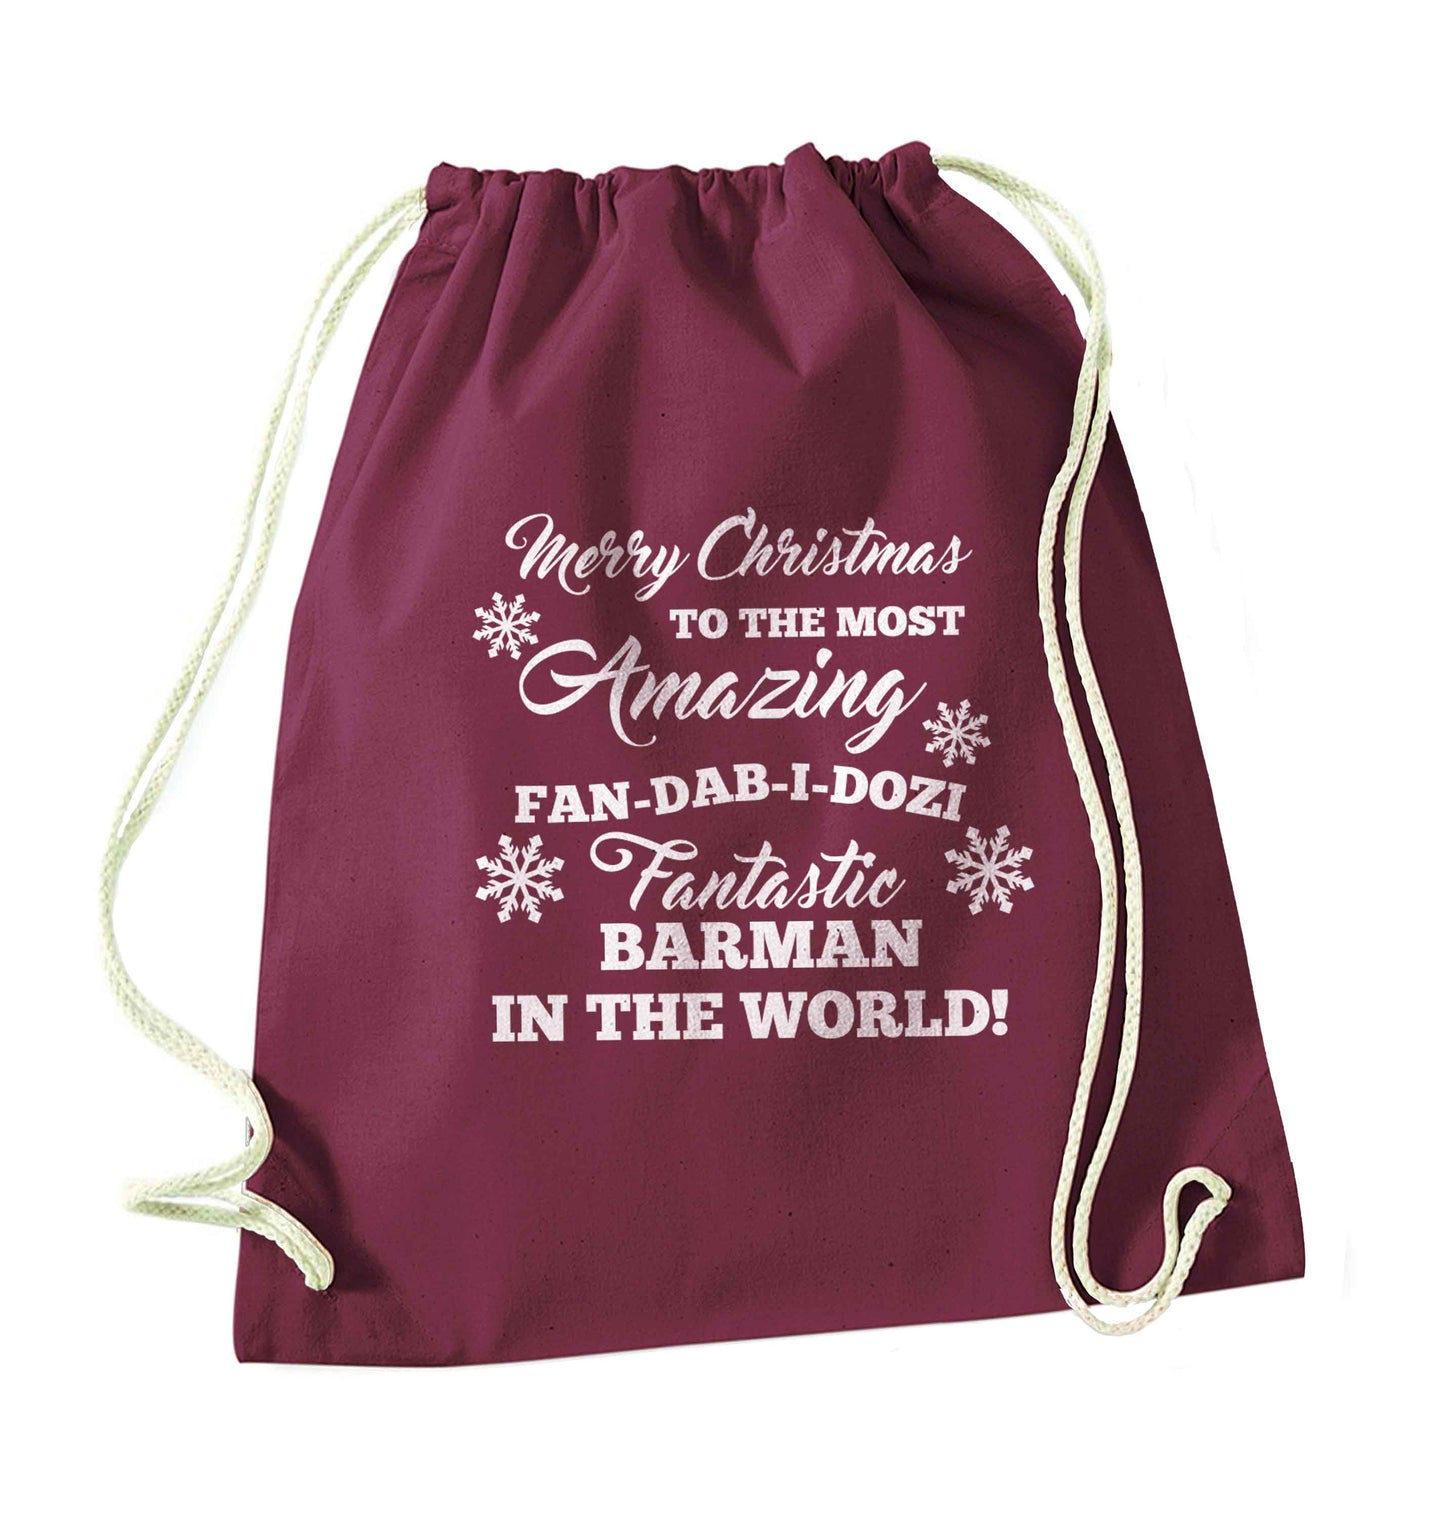 Merry Christmas to the most amazing barman in the world! maroon drawstring bag